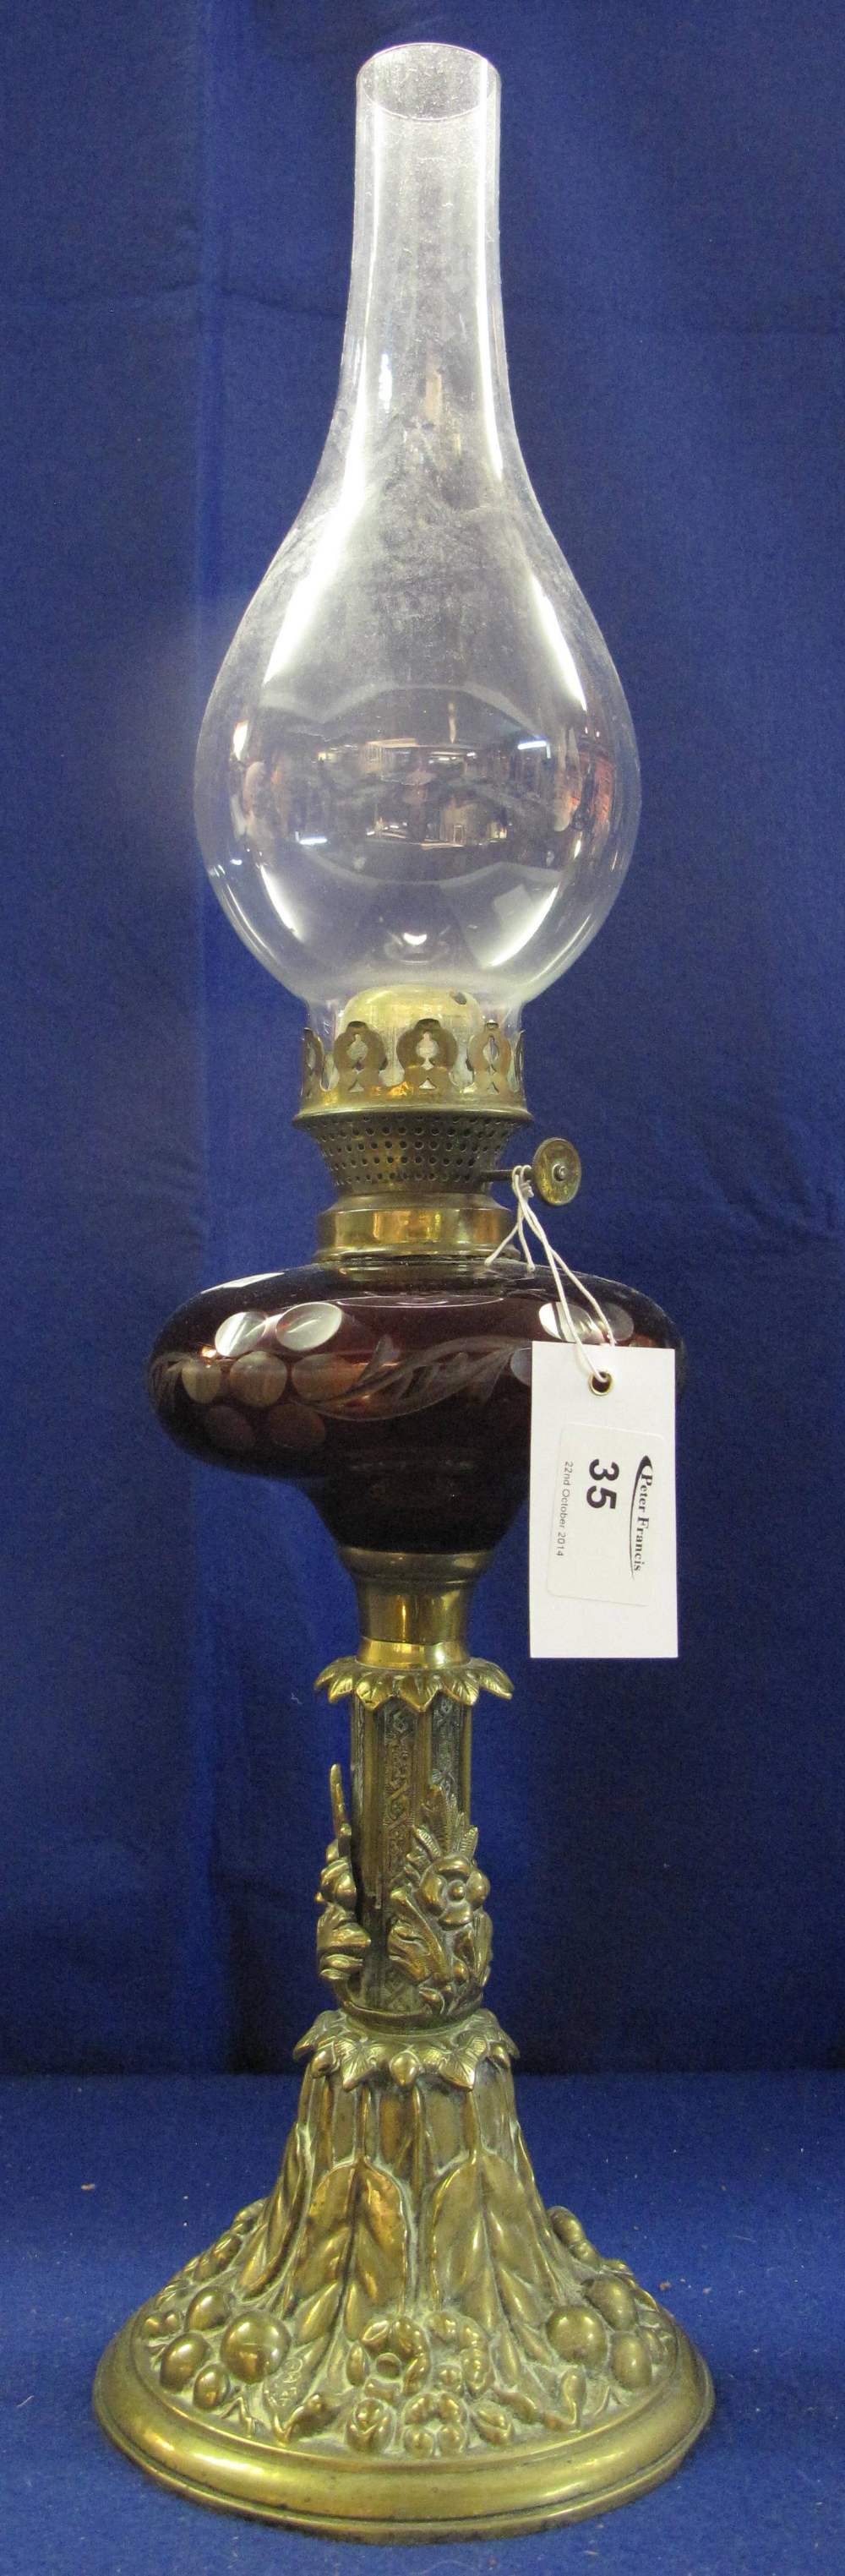 Early 20th Century brass single burner oil lamp with flash cut glass reservoir, relief cast